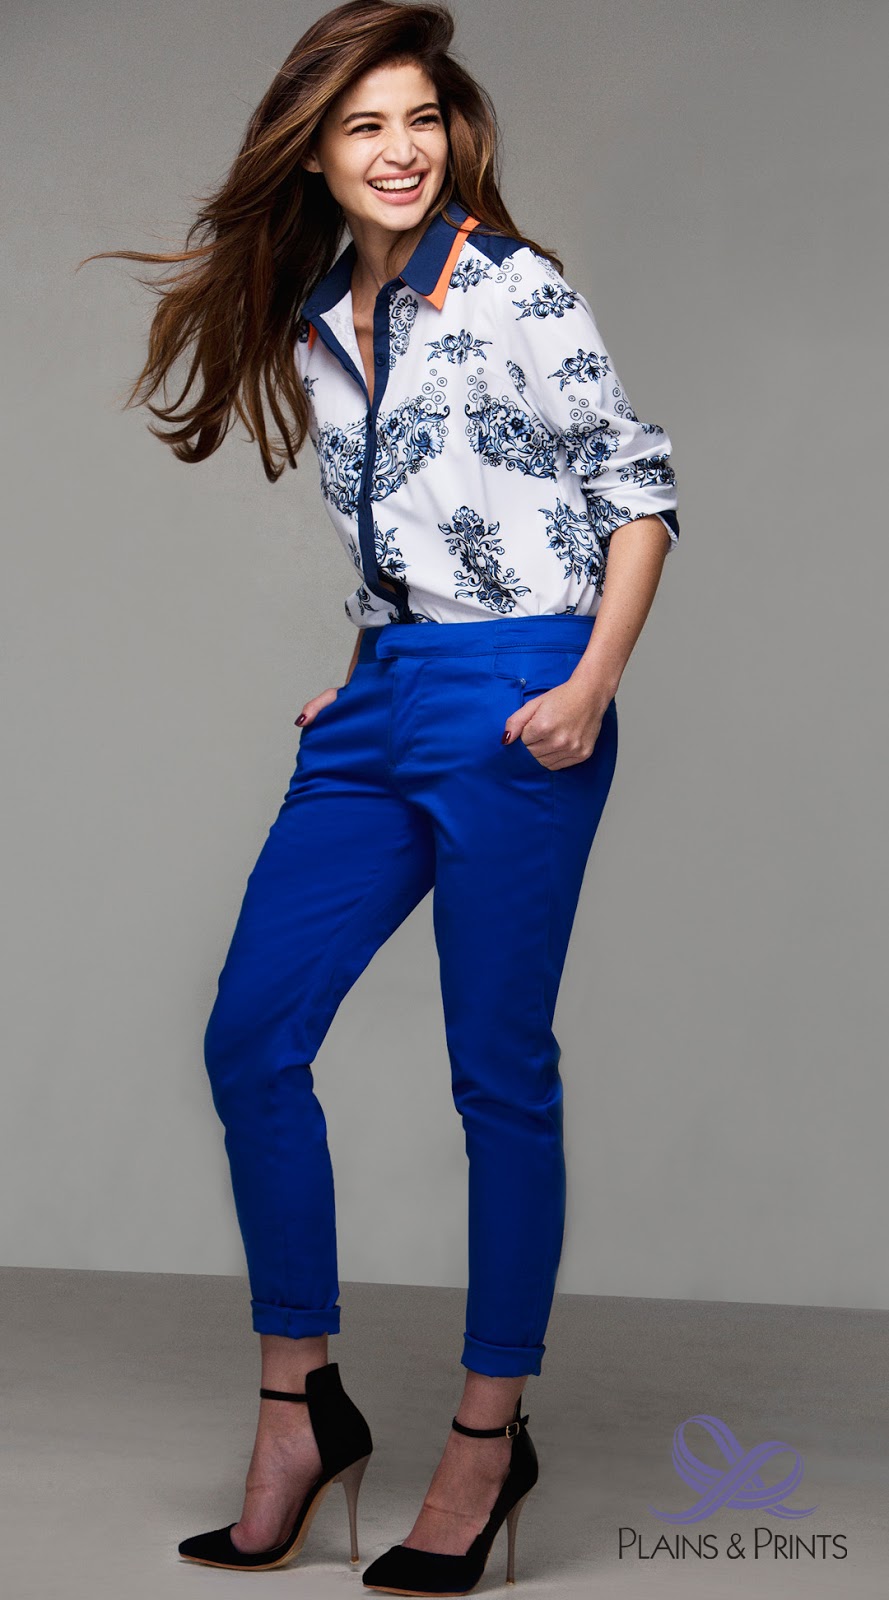 Anne Curtis and Plains & Prints= Perfect Partnership